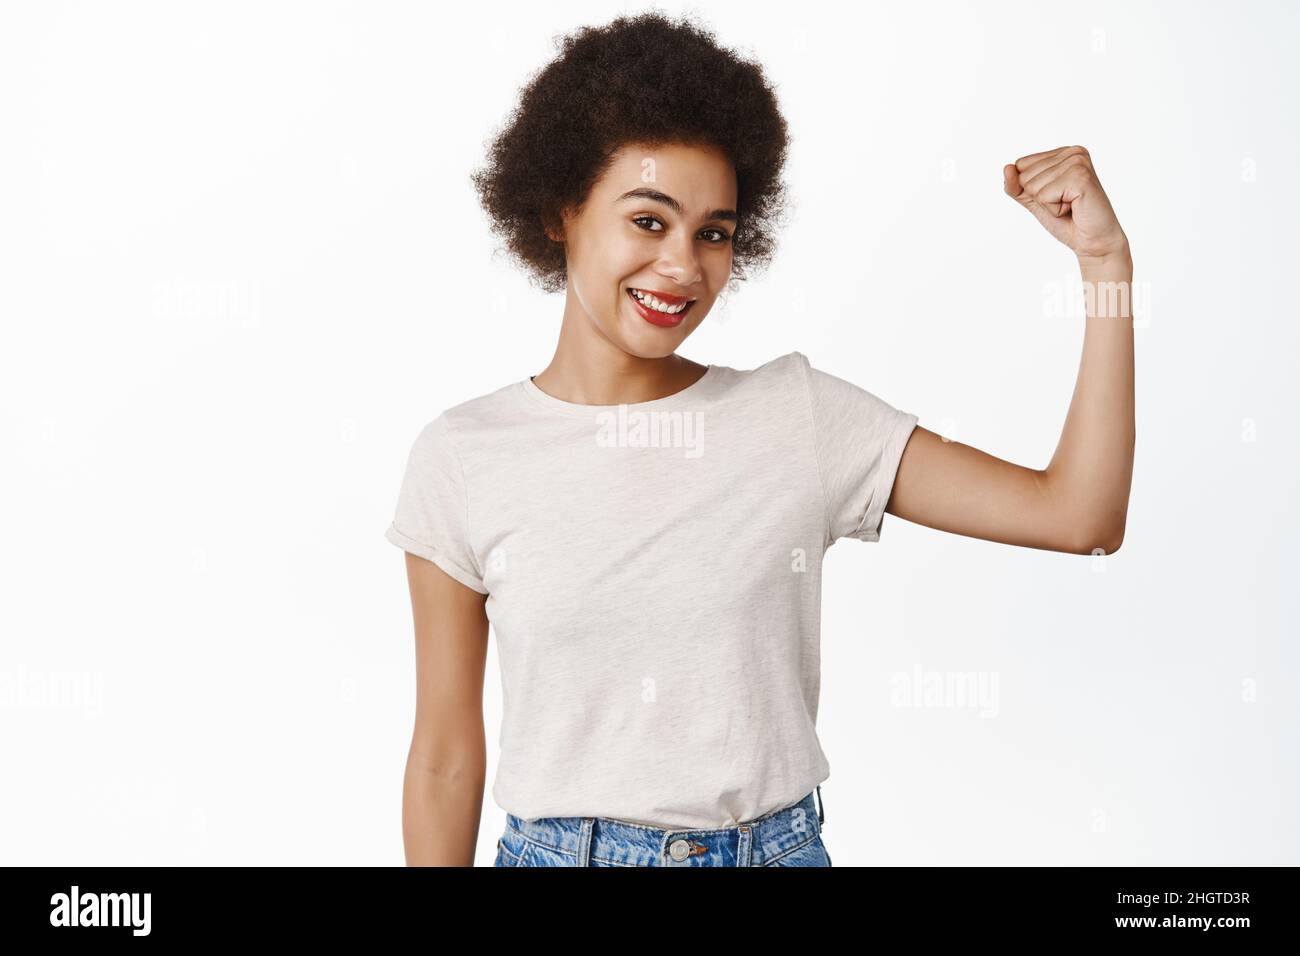 Strength and women workout concept. Smiling black girl with afro hair, young woman flexing biceps, showing muscles on arms, standing over white Stock Photo